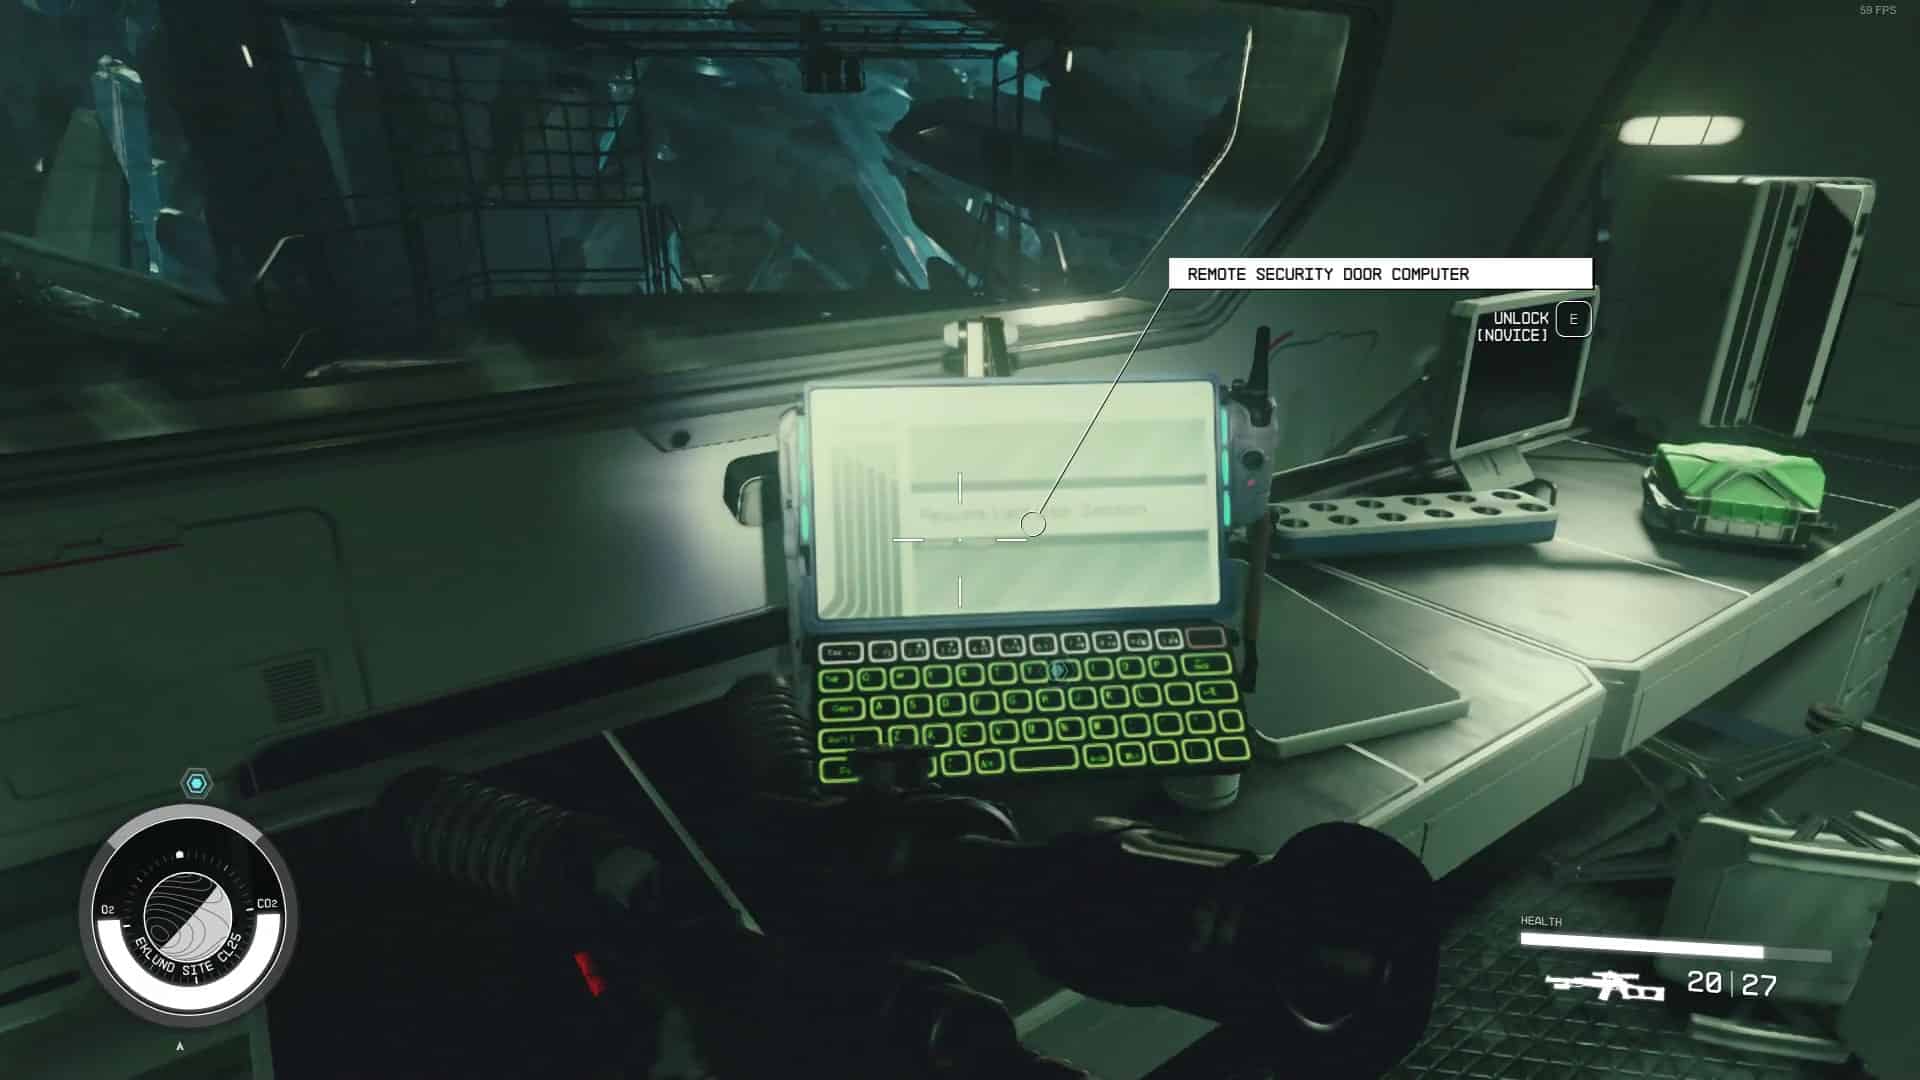 Starfield Surgical Strike: The computer in the mining facility.